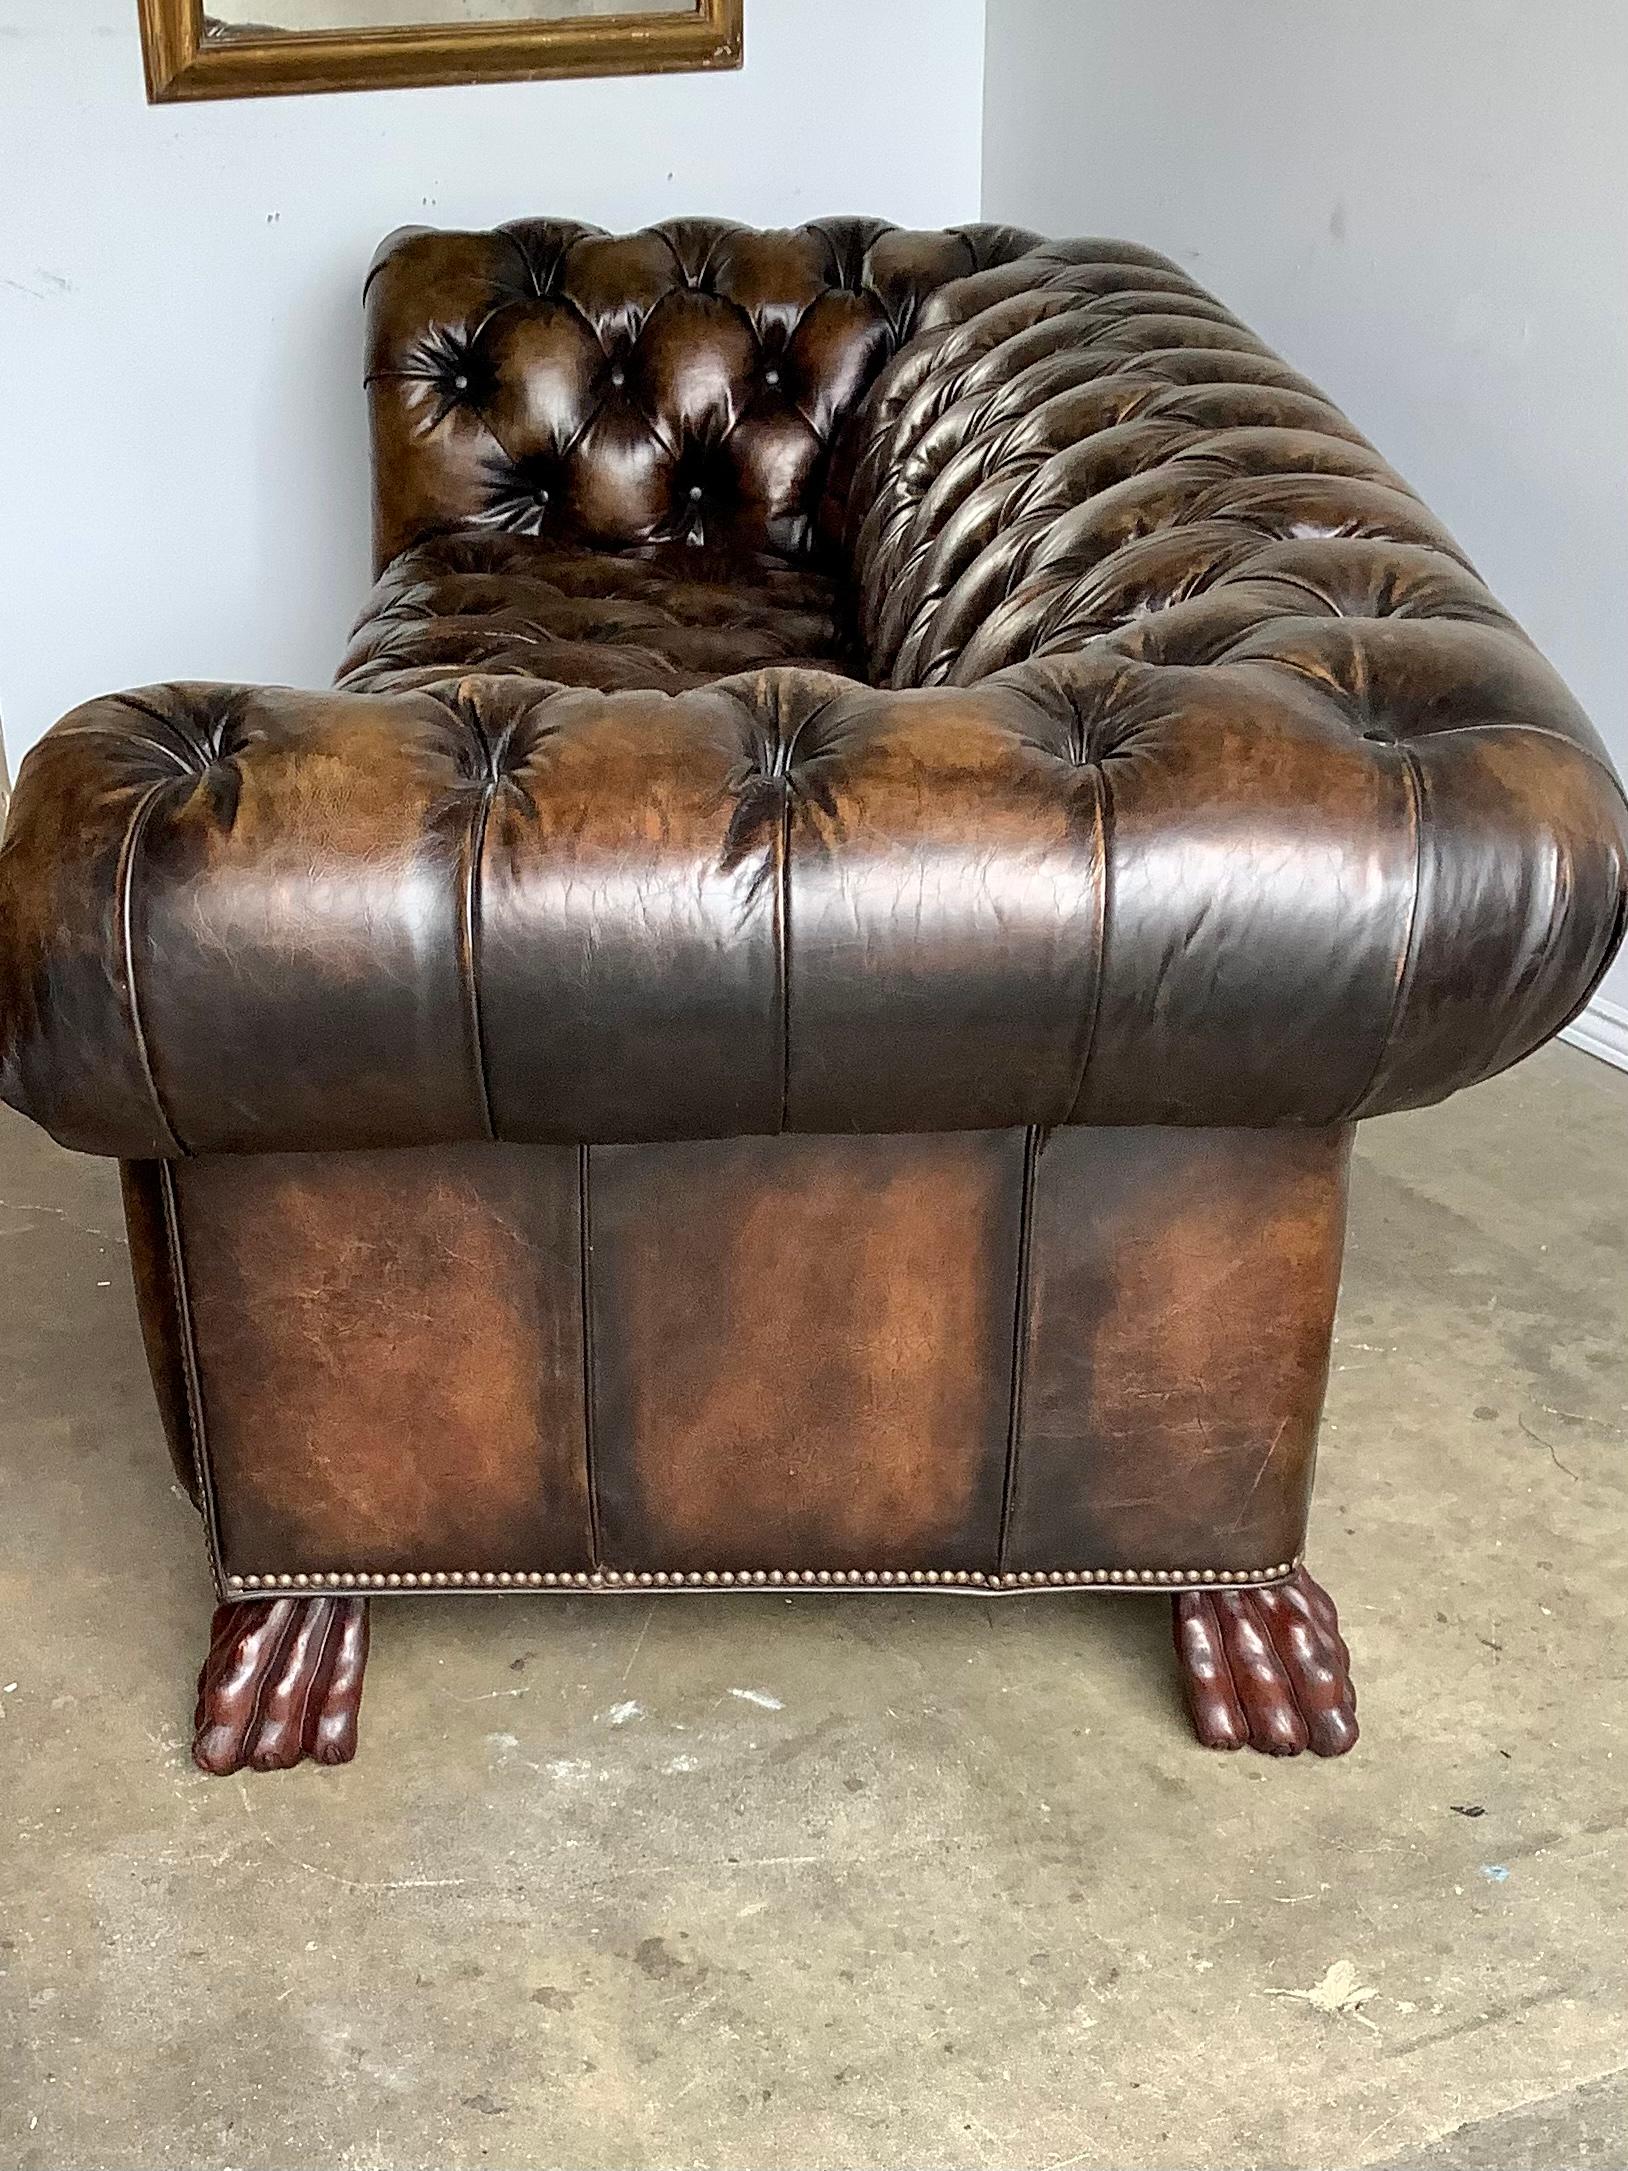 1930’s English Leather Chesterfield Style Sofa with Lion’s Paw Feet 7